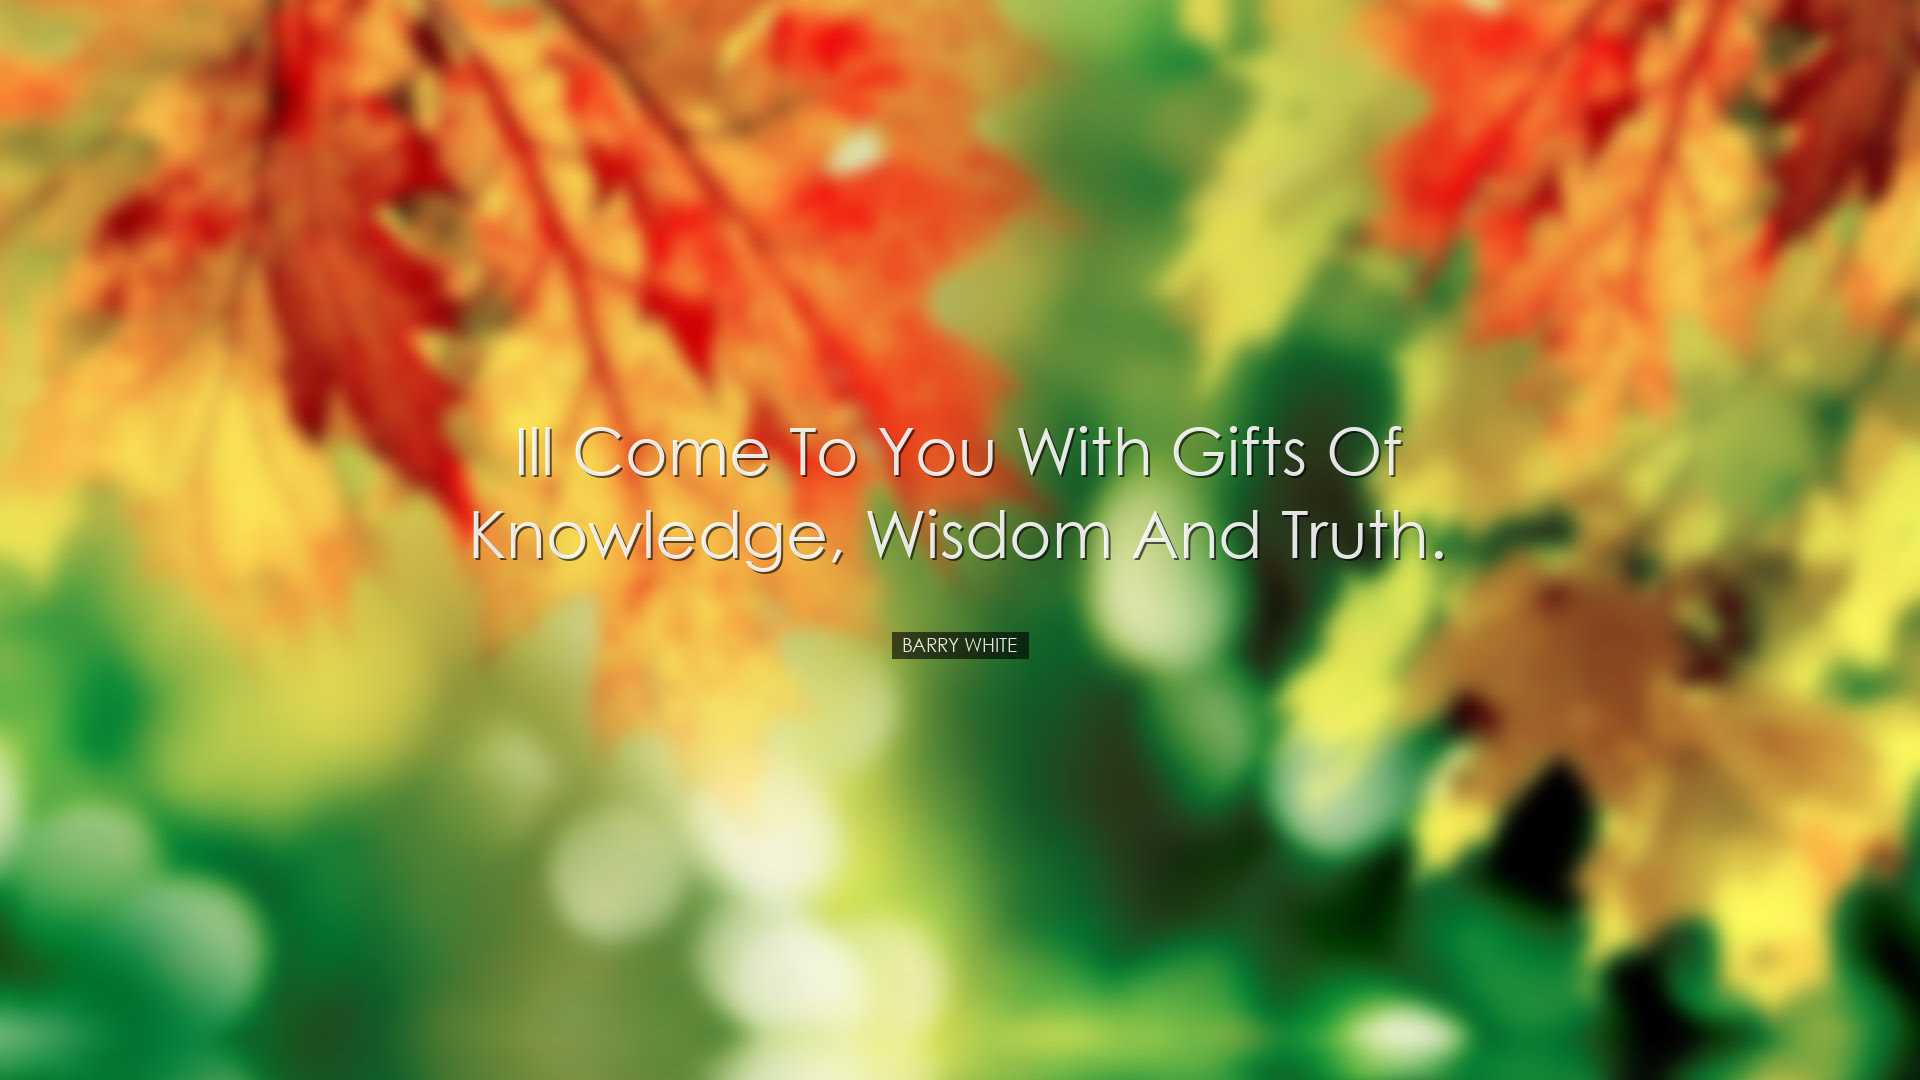 Ill come to you with gifts of knowledge, wisdom and truth. - Barry